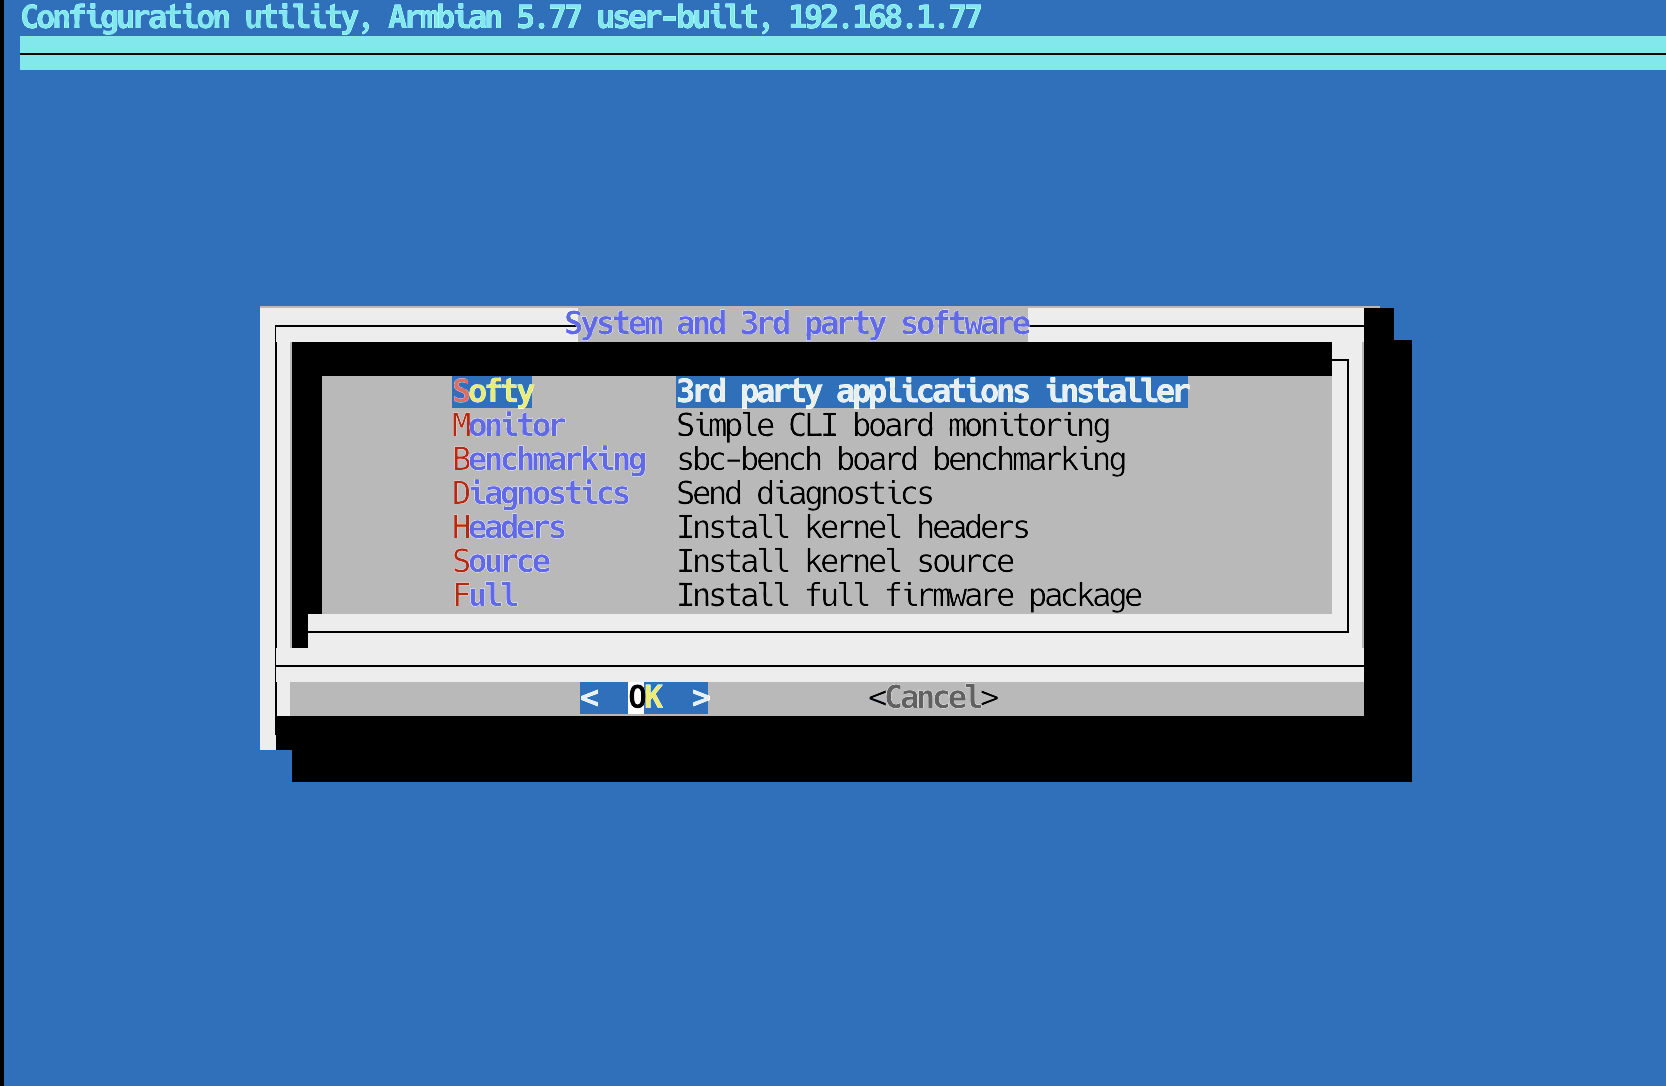 Installing Softy in Armbian